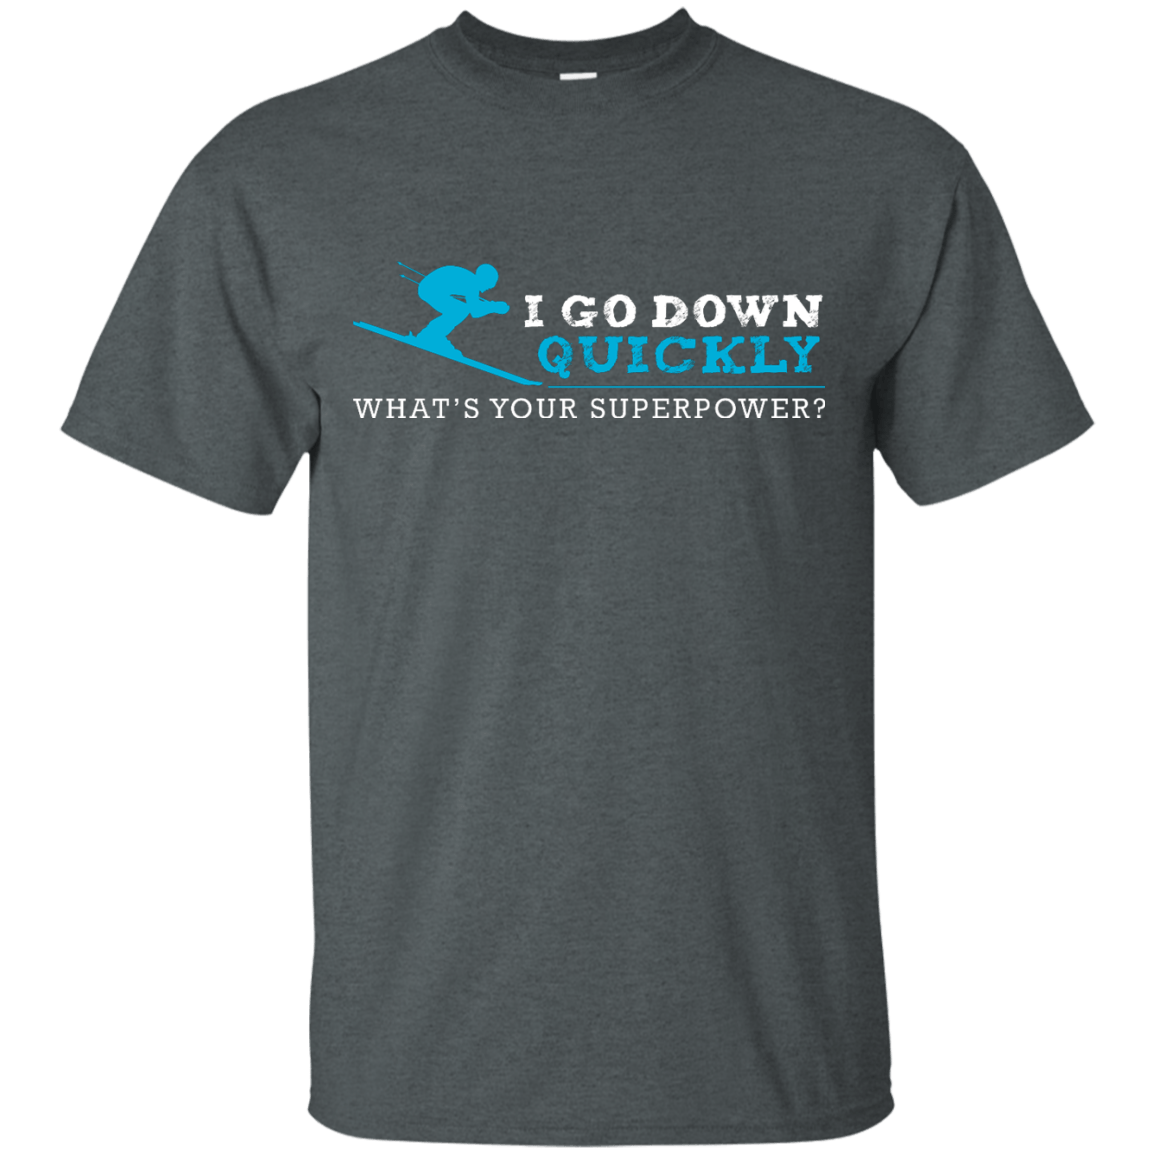 I Go Down Quickly What's Your Superpower - Skiing Tees and V-neck - Powderaddicts